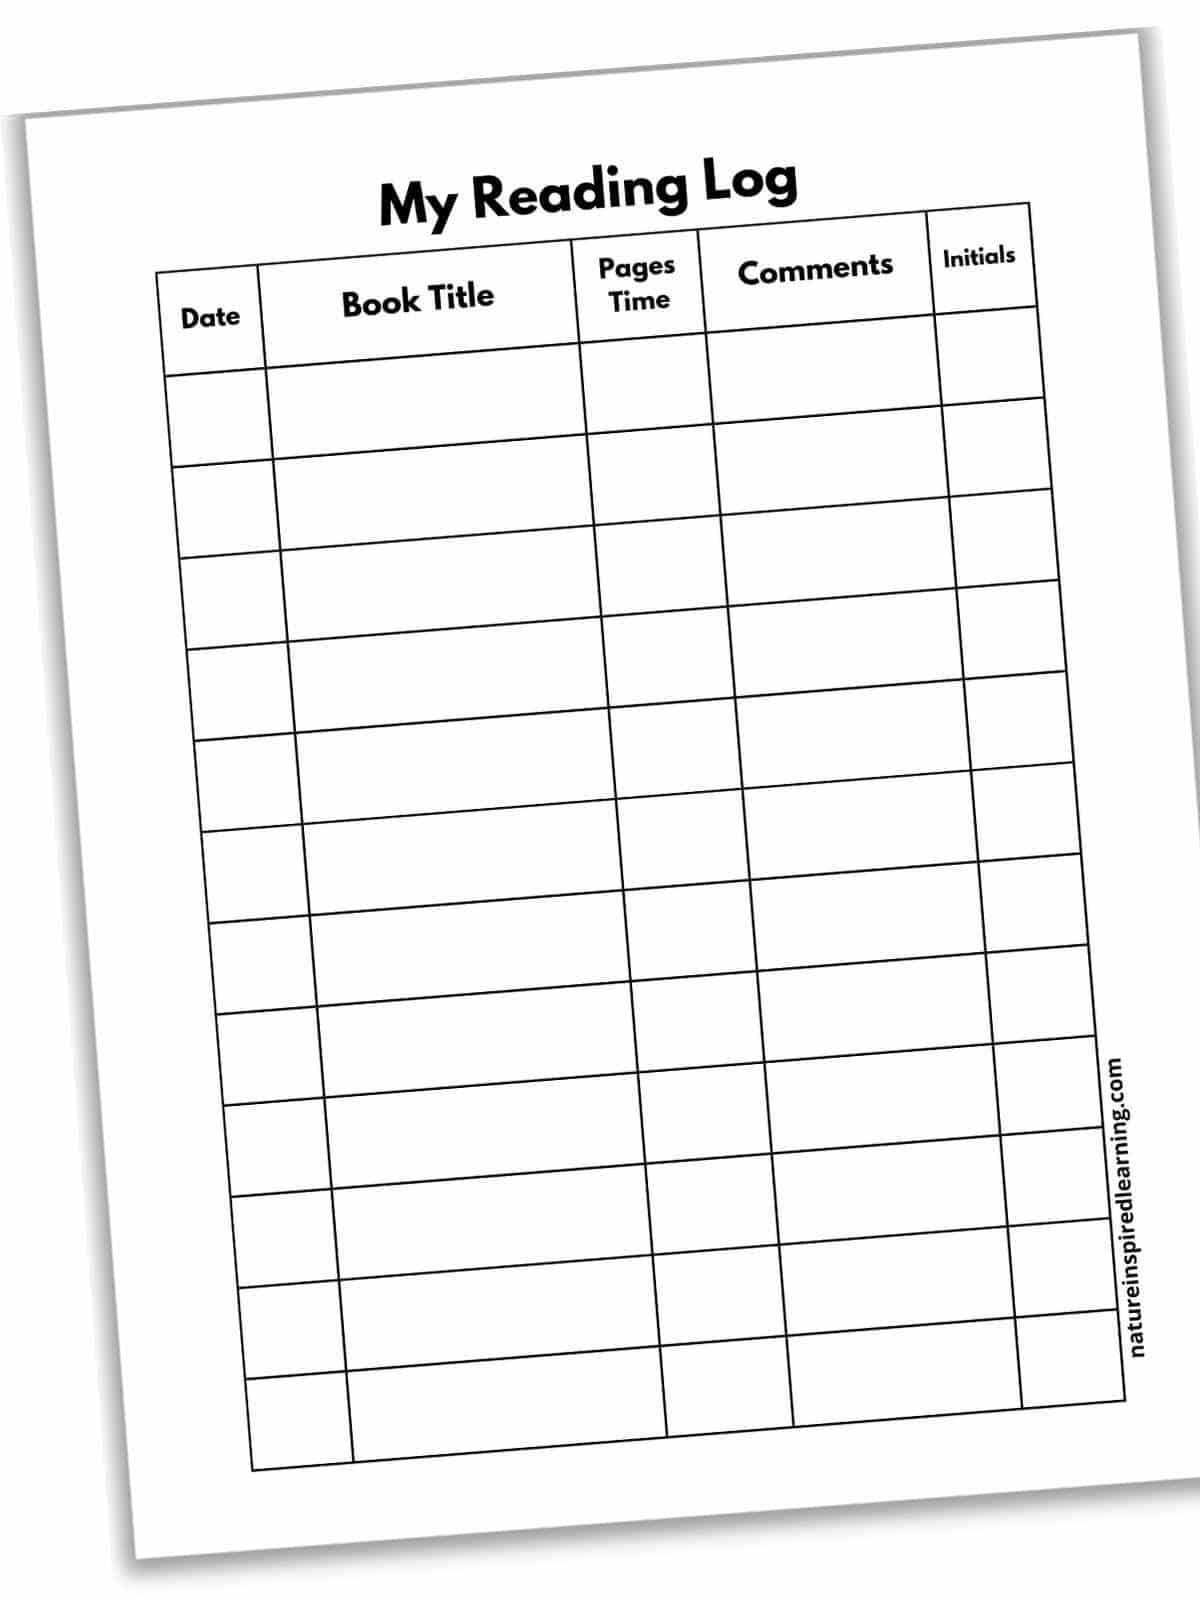 My reading log printable with rows and columns